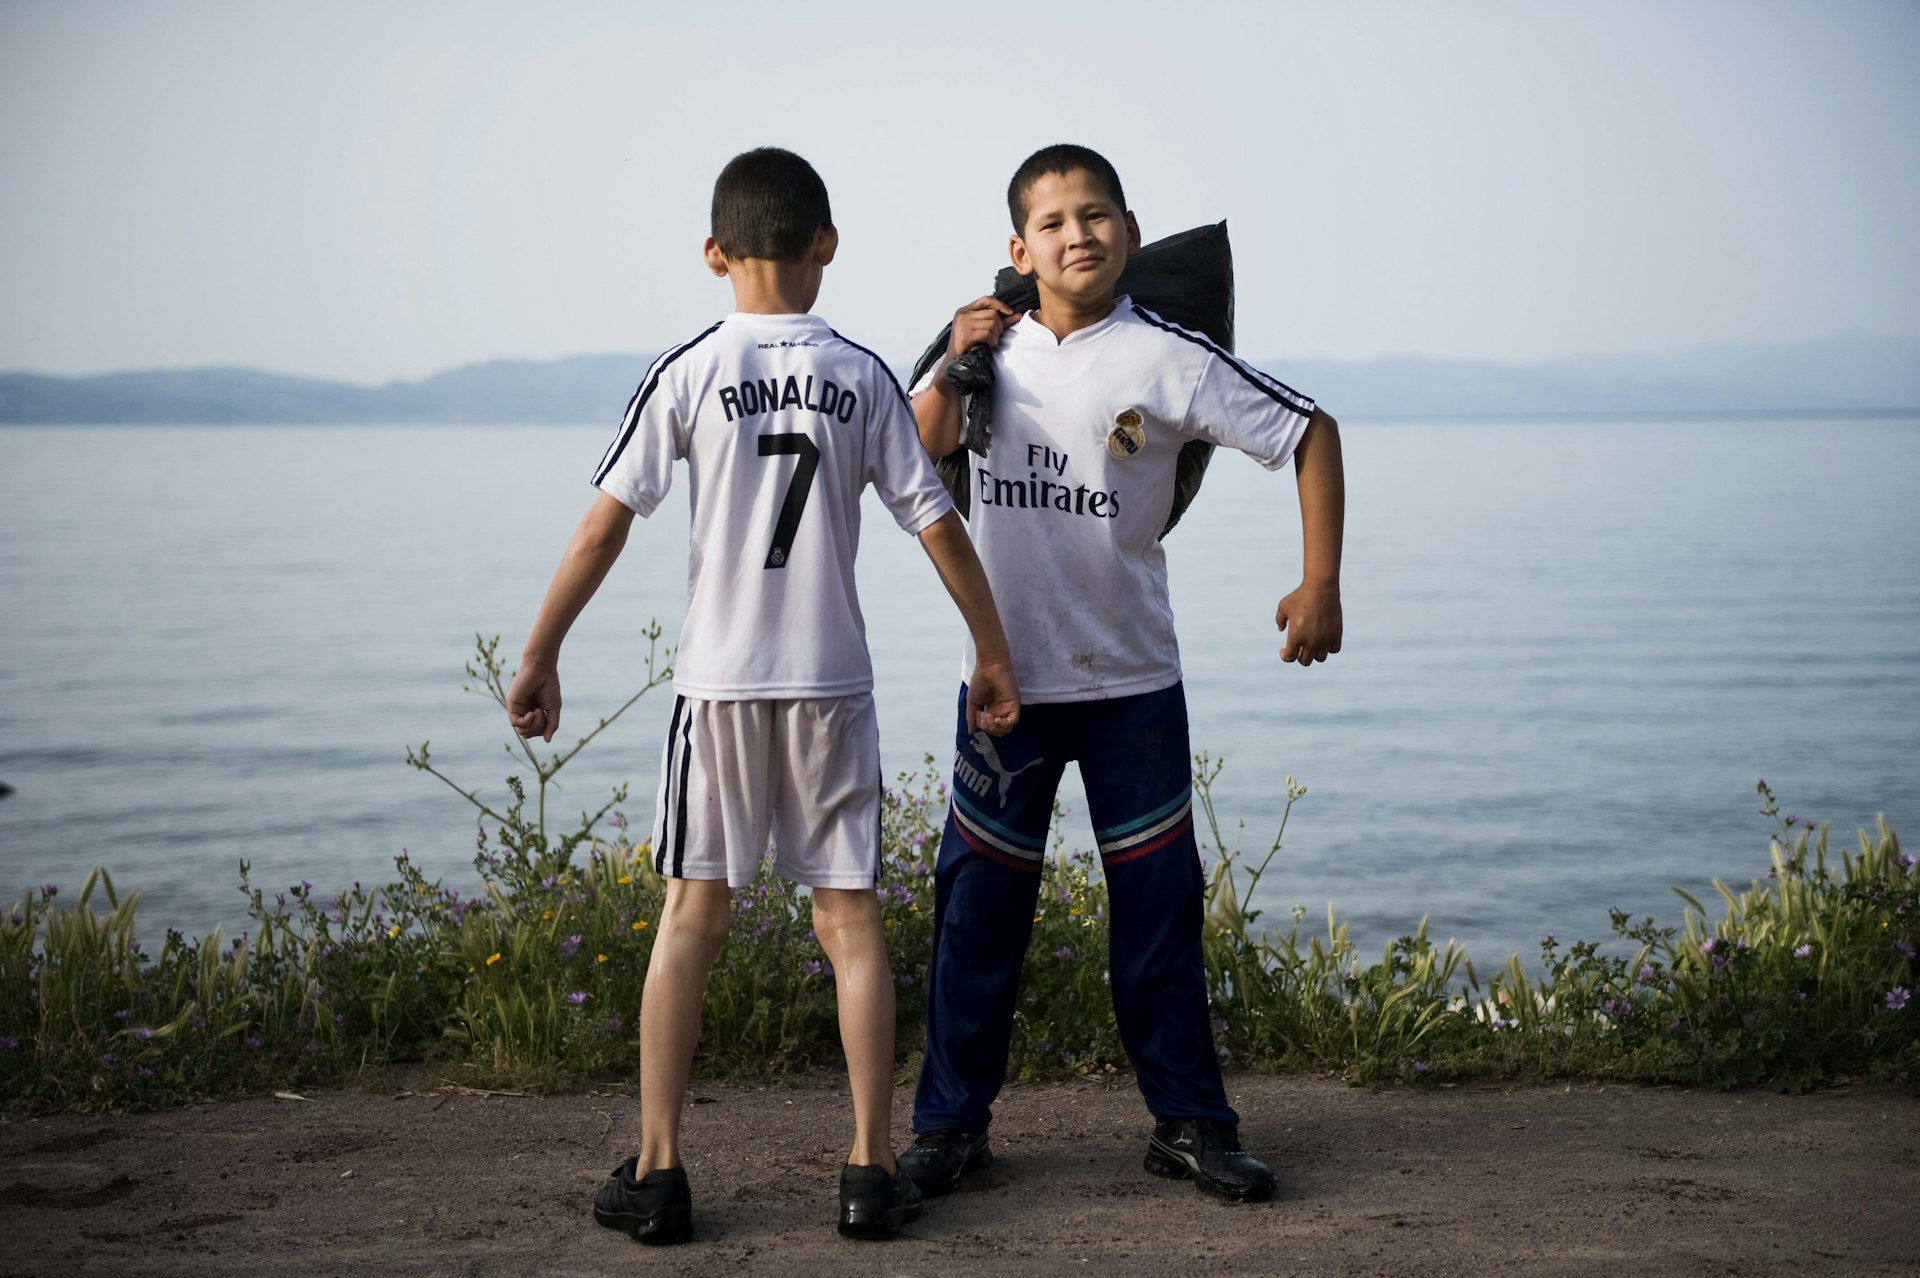 Story Behind the Still: The defiant joy of Afghan refugees arriving on Lesvos